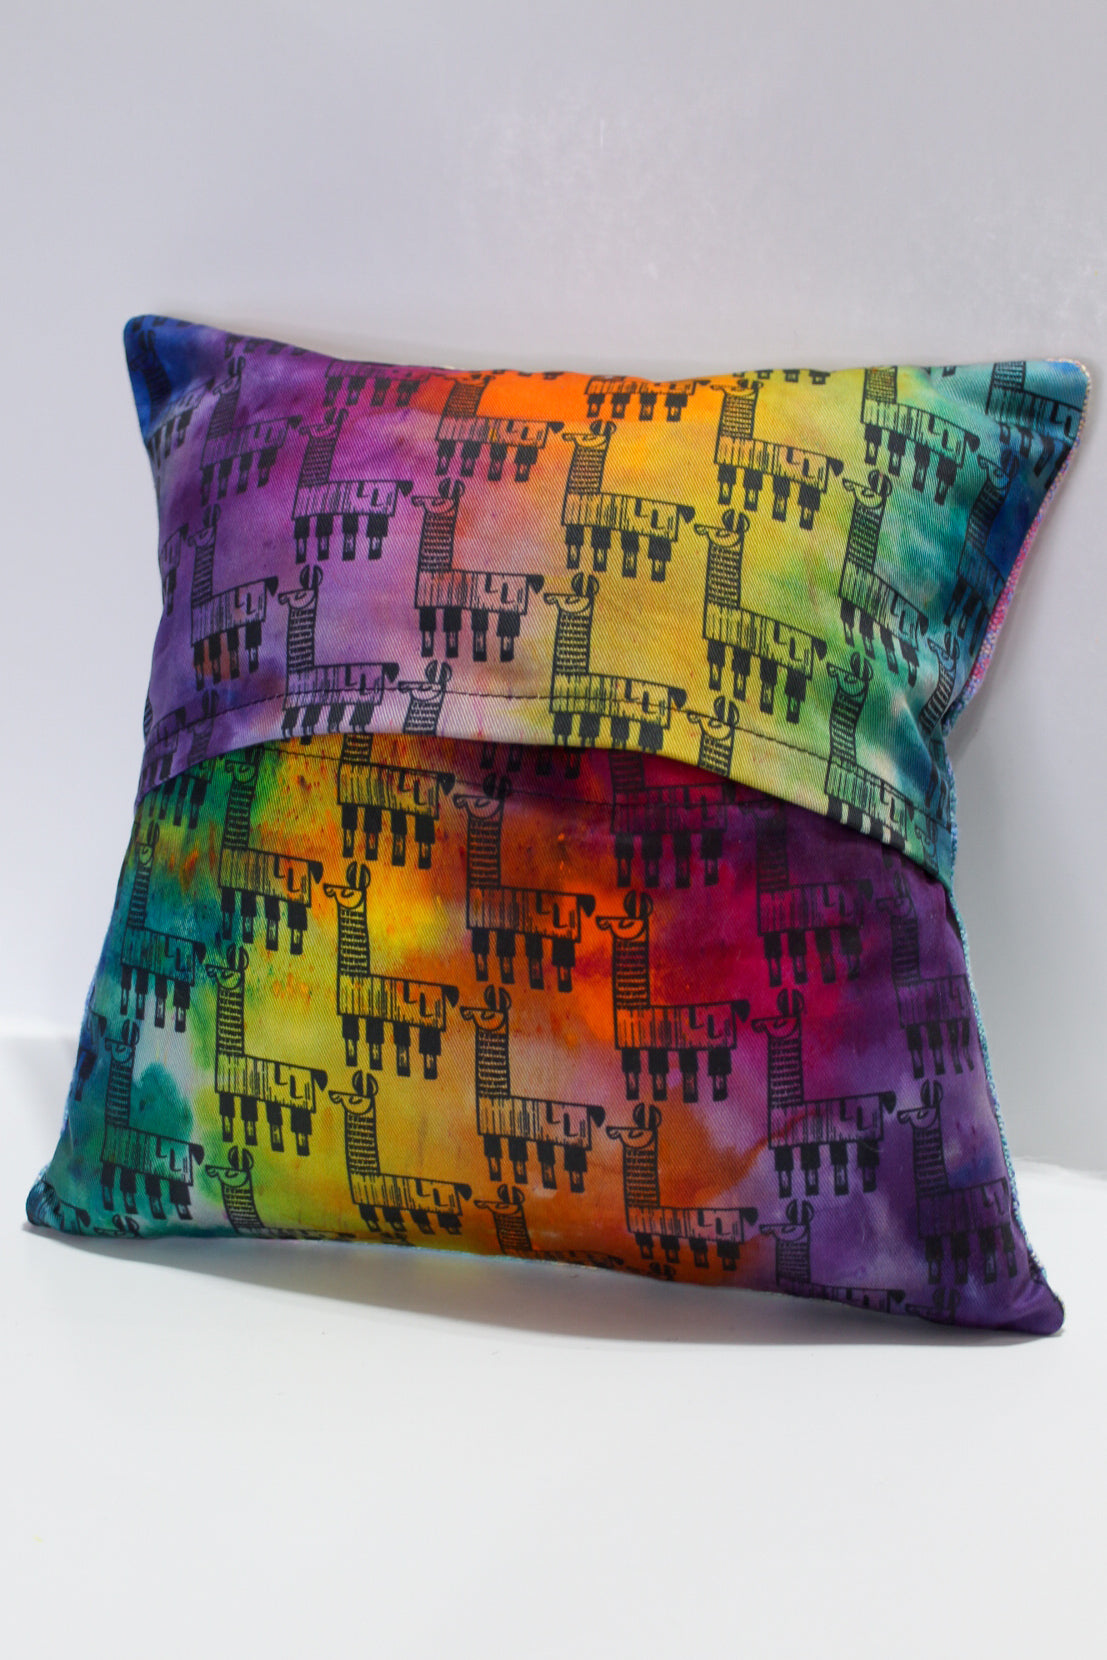 12"x12" Throw Pillow Cover - Renewed